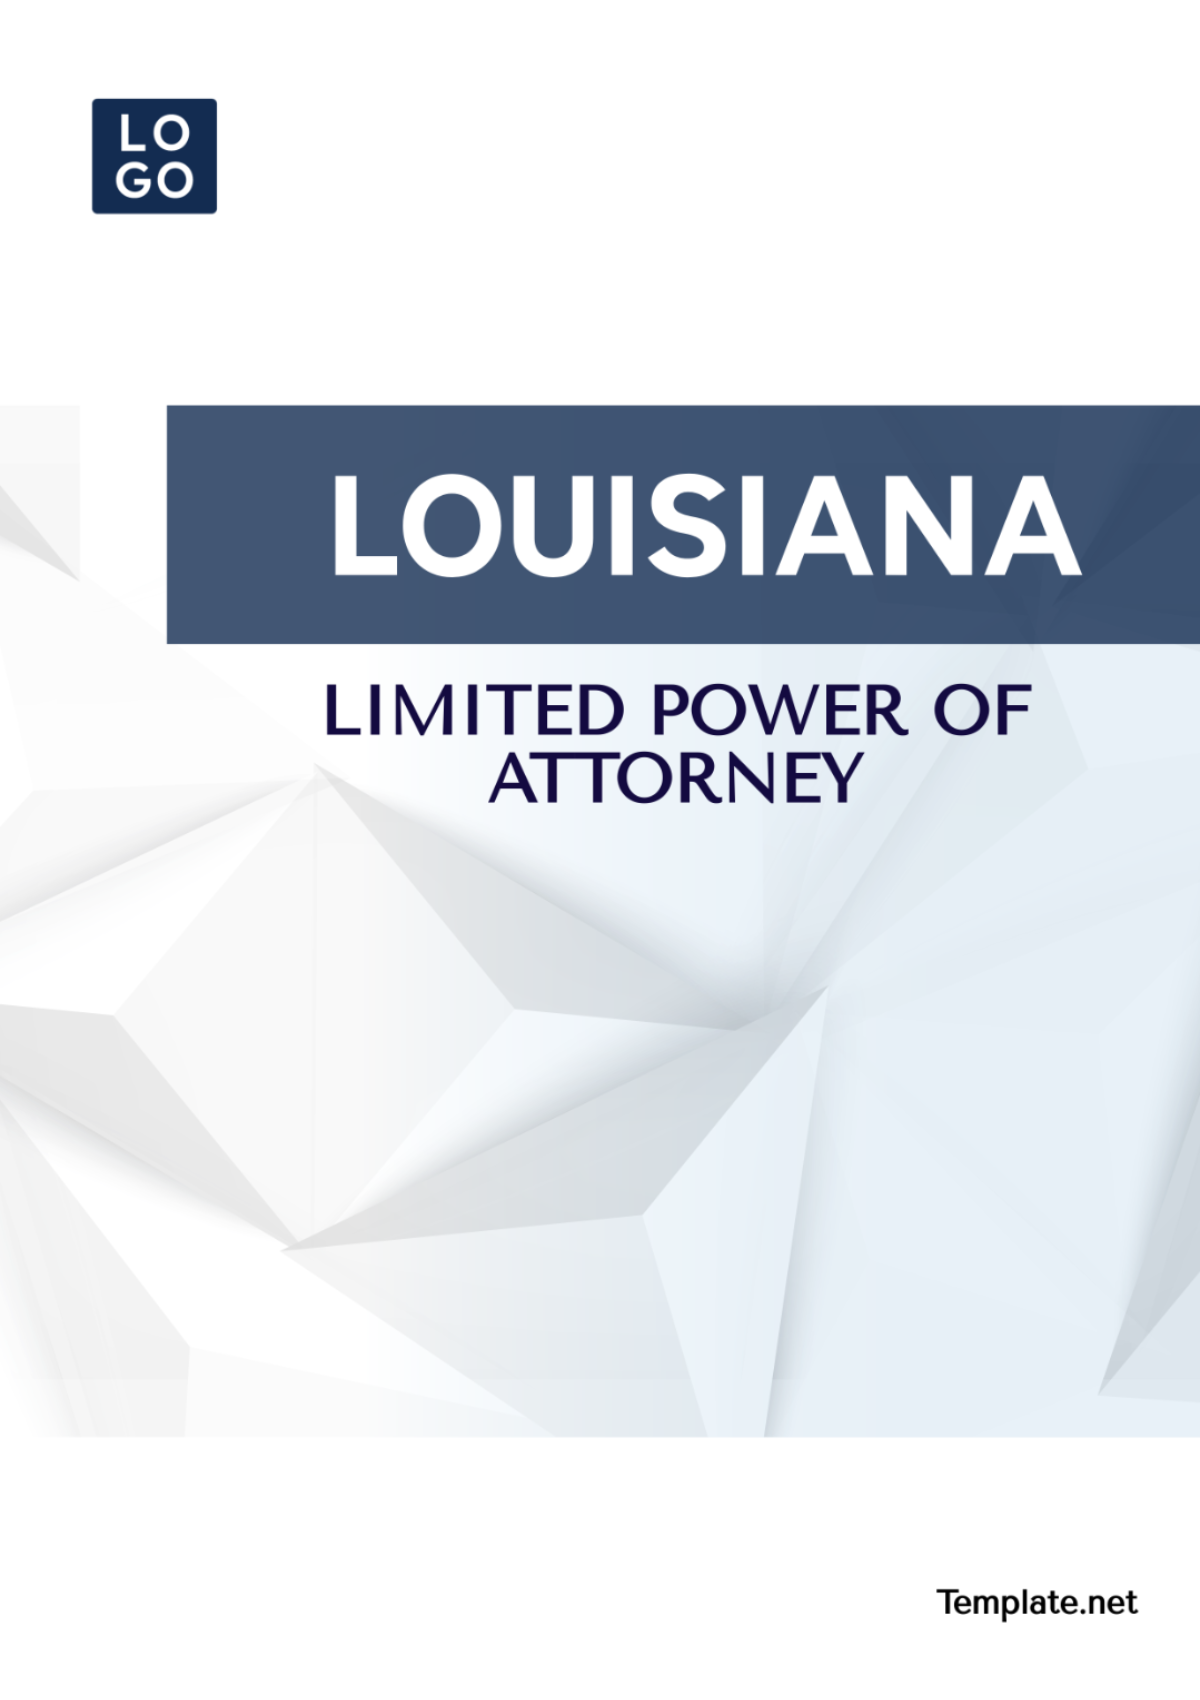 Louisiana Limited Power of Attorney Template